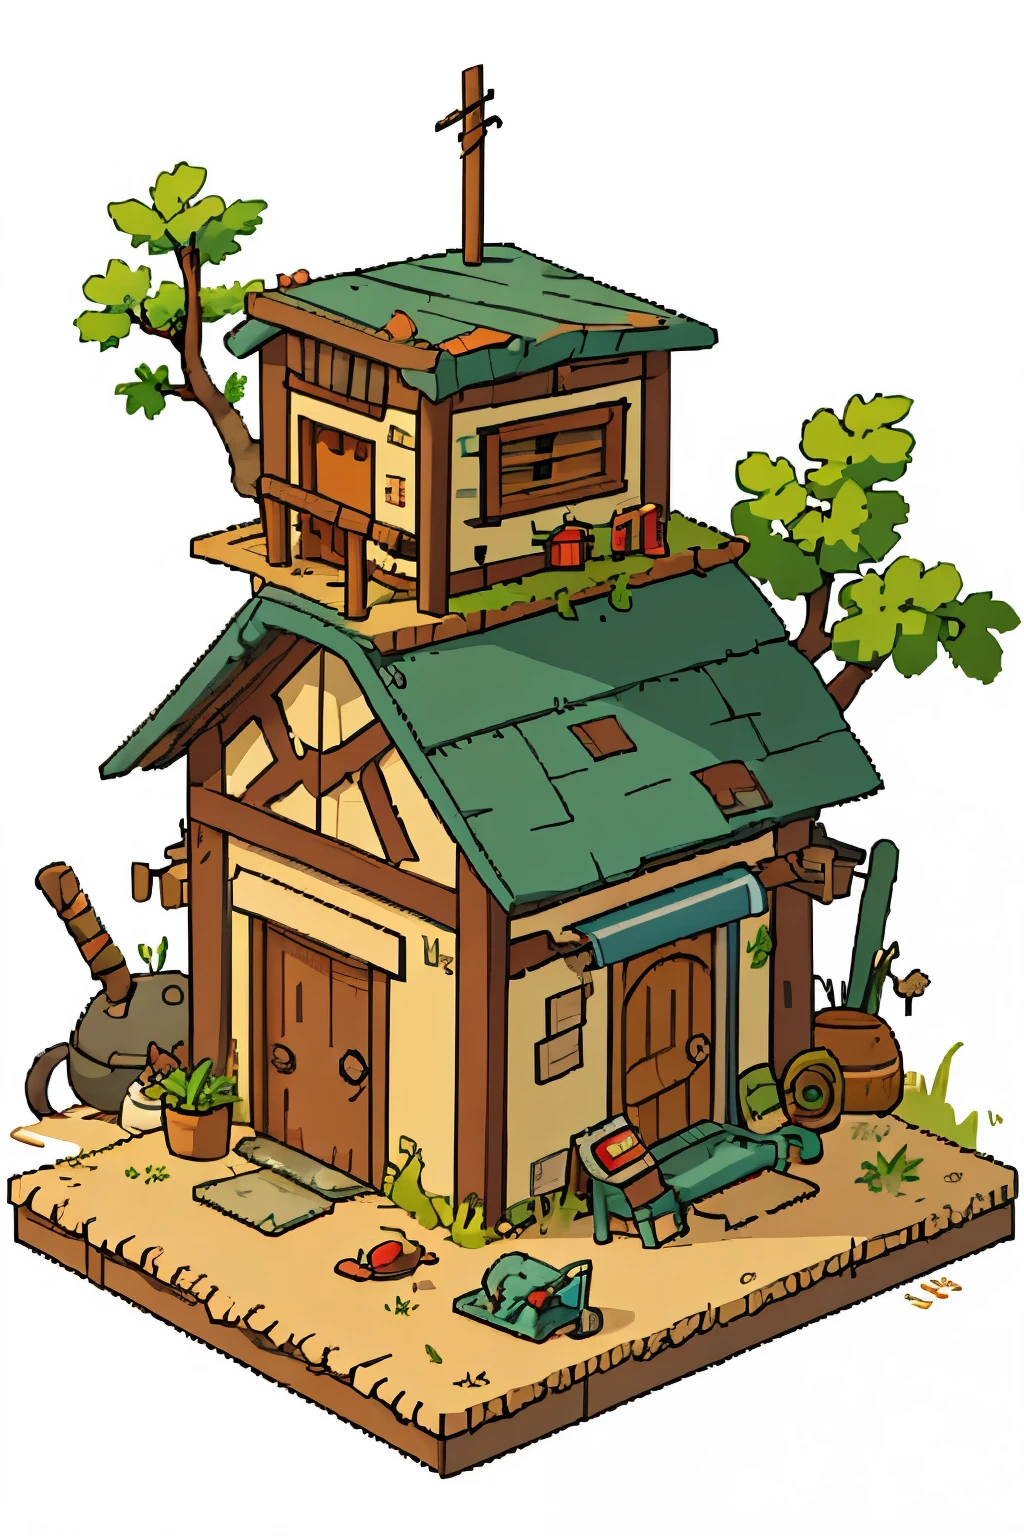 pixel,the girl writes,wanderer in robes, in the cabin of the plane,Small wooden table,sitting on a wooden chair, ruined area, (destroyed house), (spikes, tires,barbed wire,Masked wanderer, Reading,potted plant,spear sticks behind your back,((apocalypse style garage,buggy)),sand,White background,